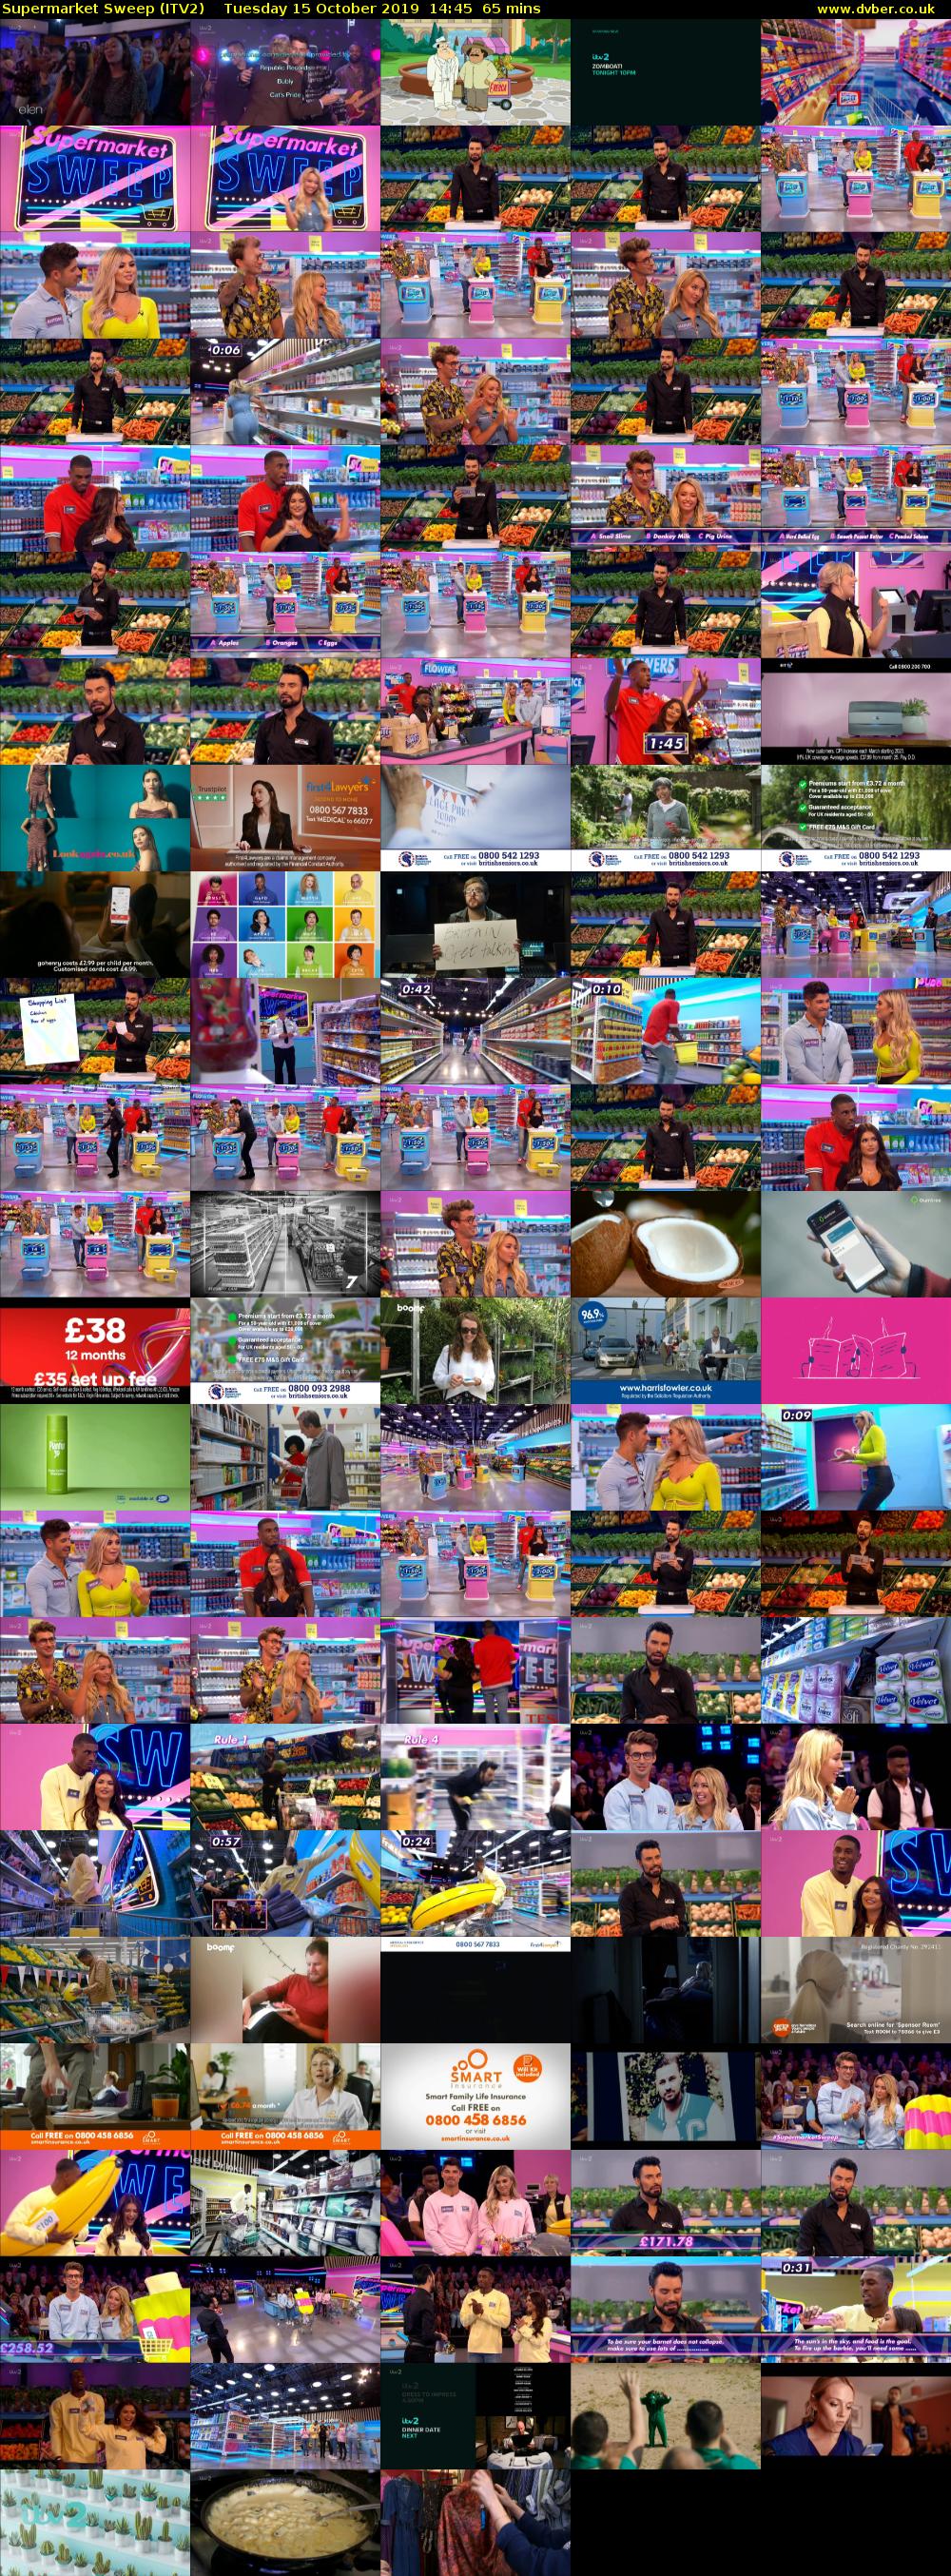 Supermarket Sweep (ITV2) Tuesday 15 October 2019 14:45 - 15:50